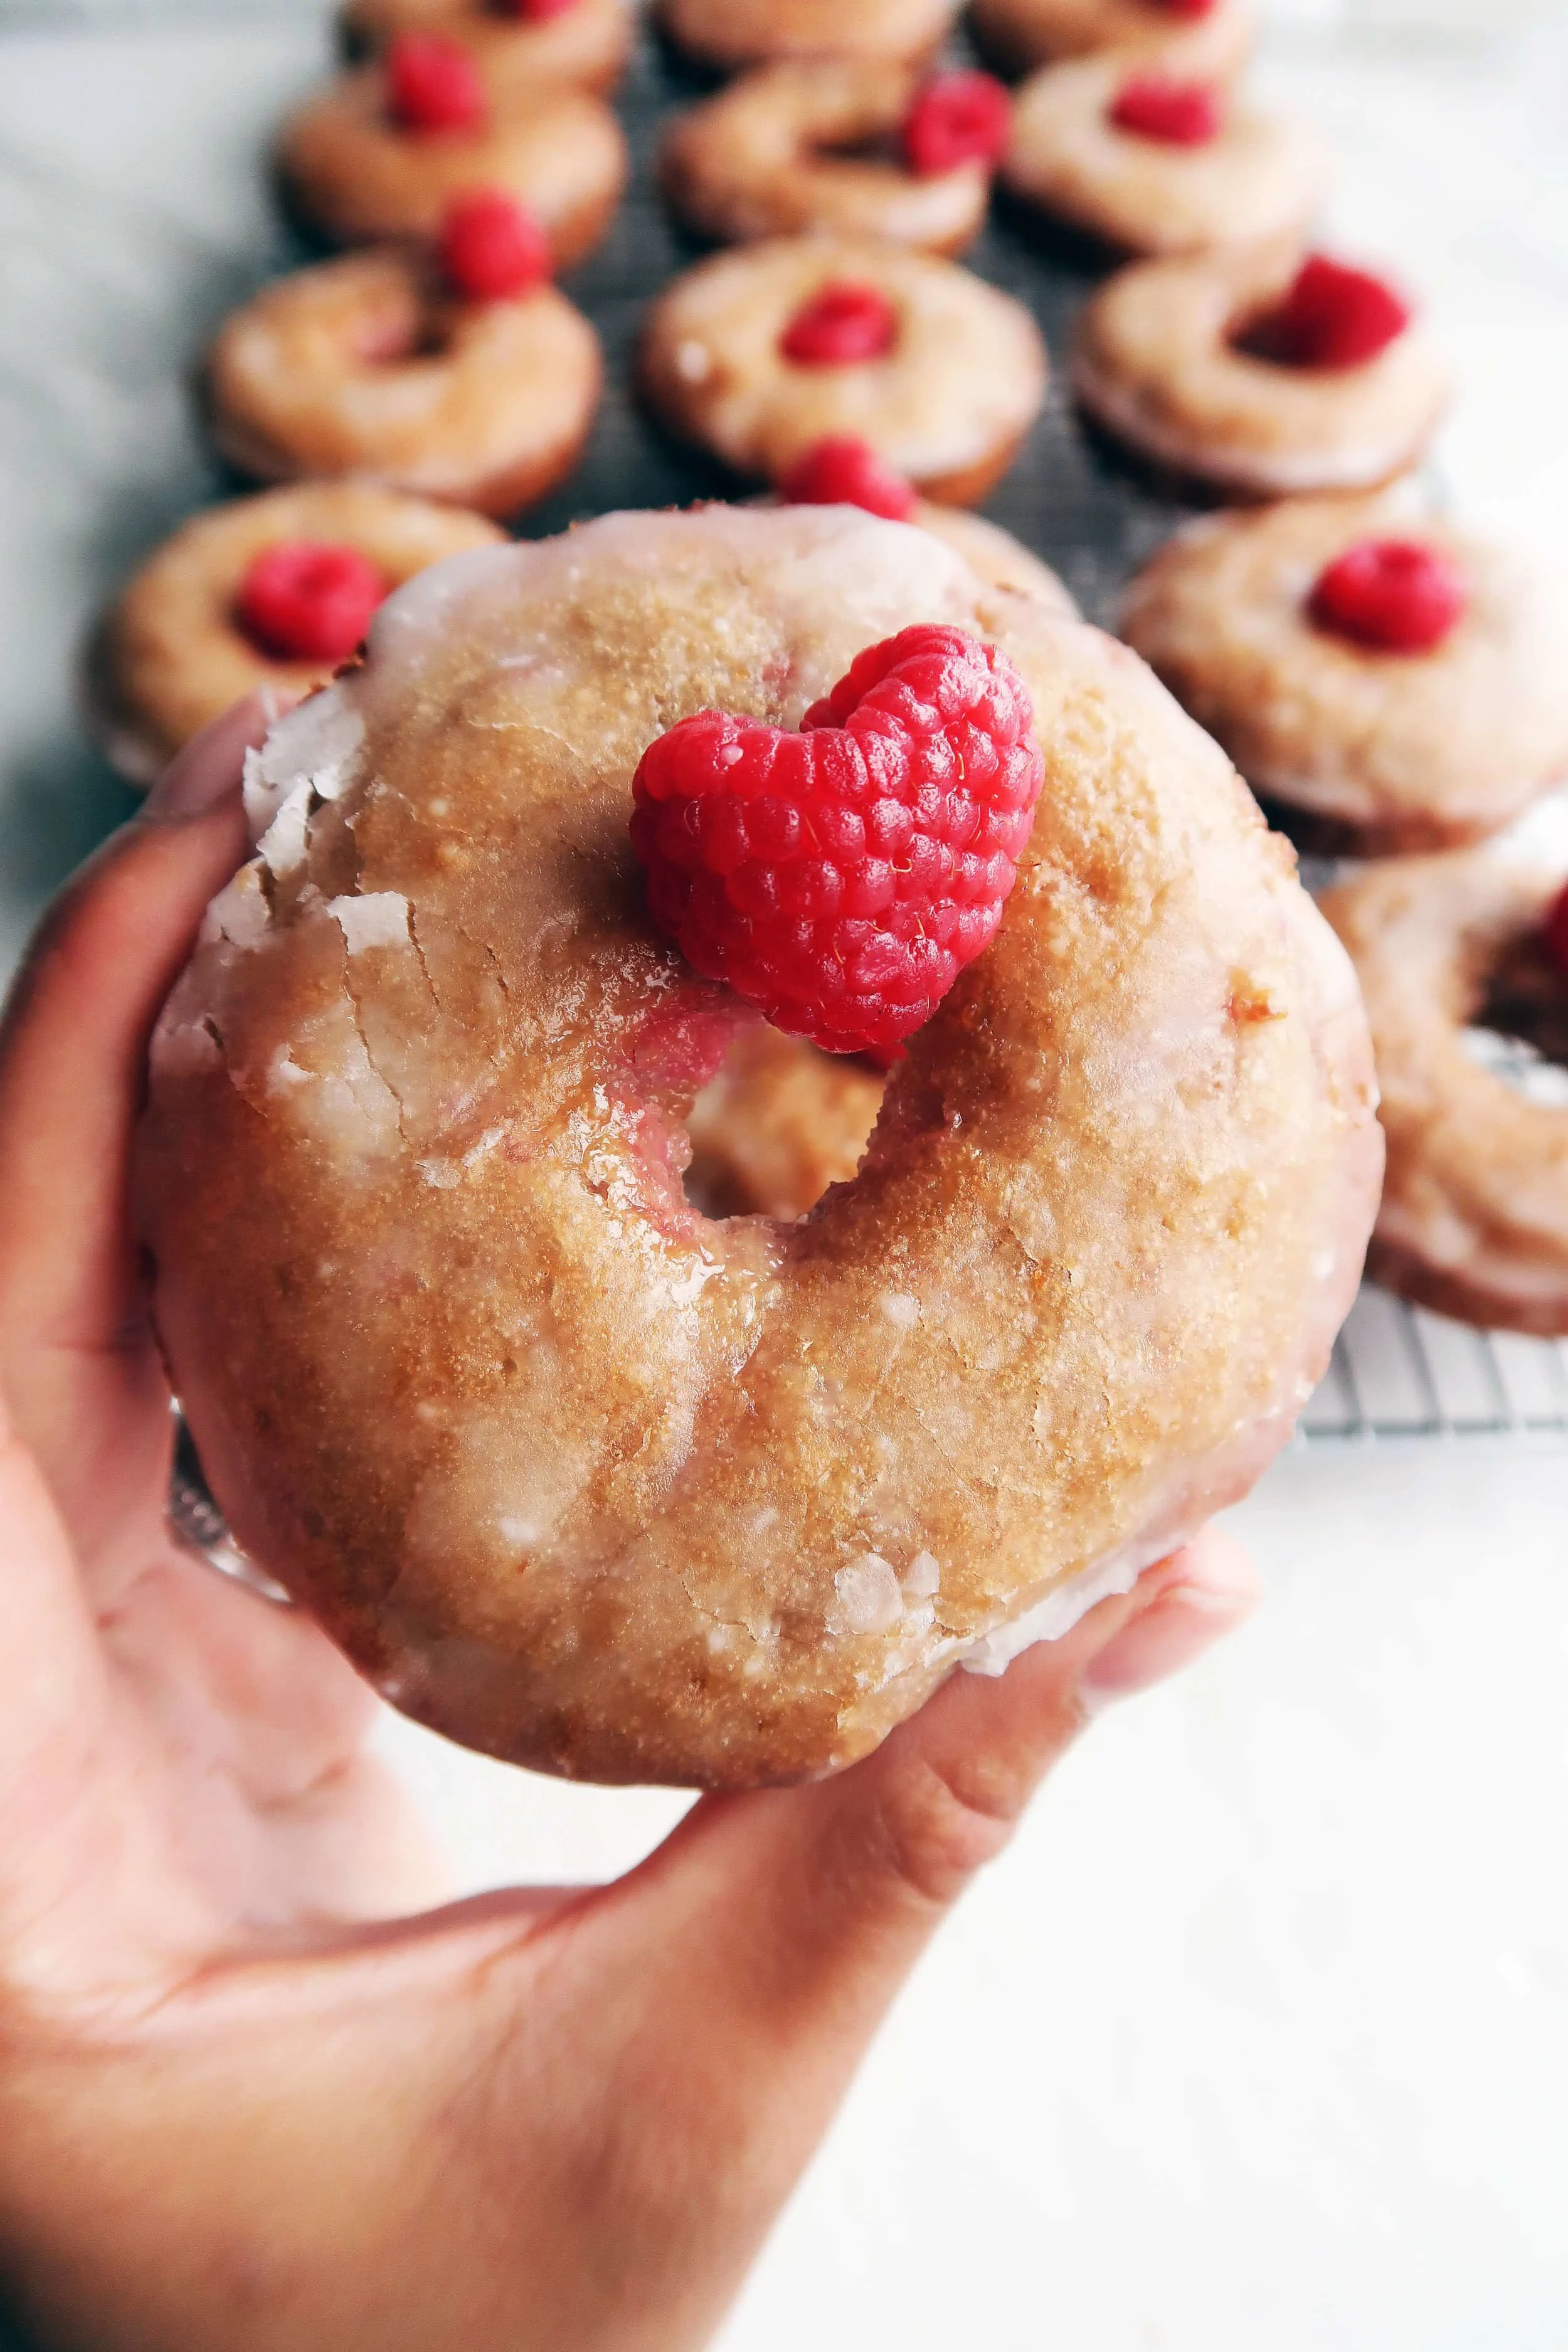 A close-up view of a hand holding a Baked Raspberry Lemon Glazed Donut with more donuts in the background.